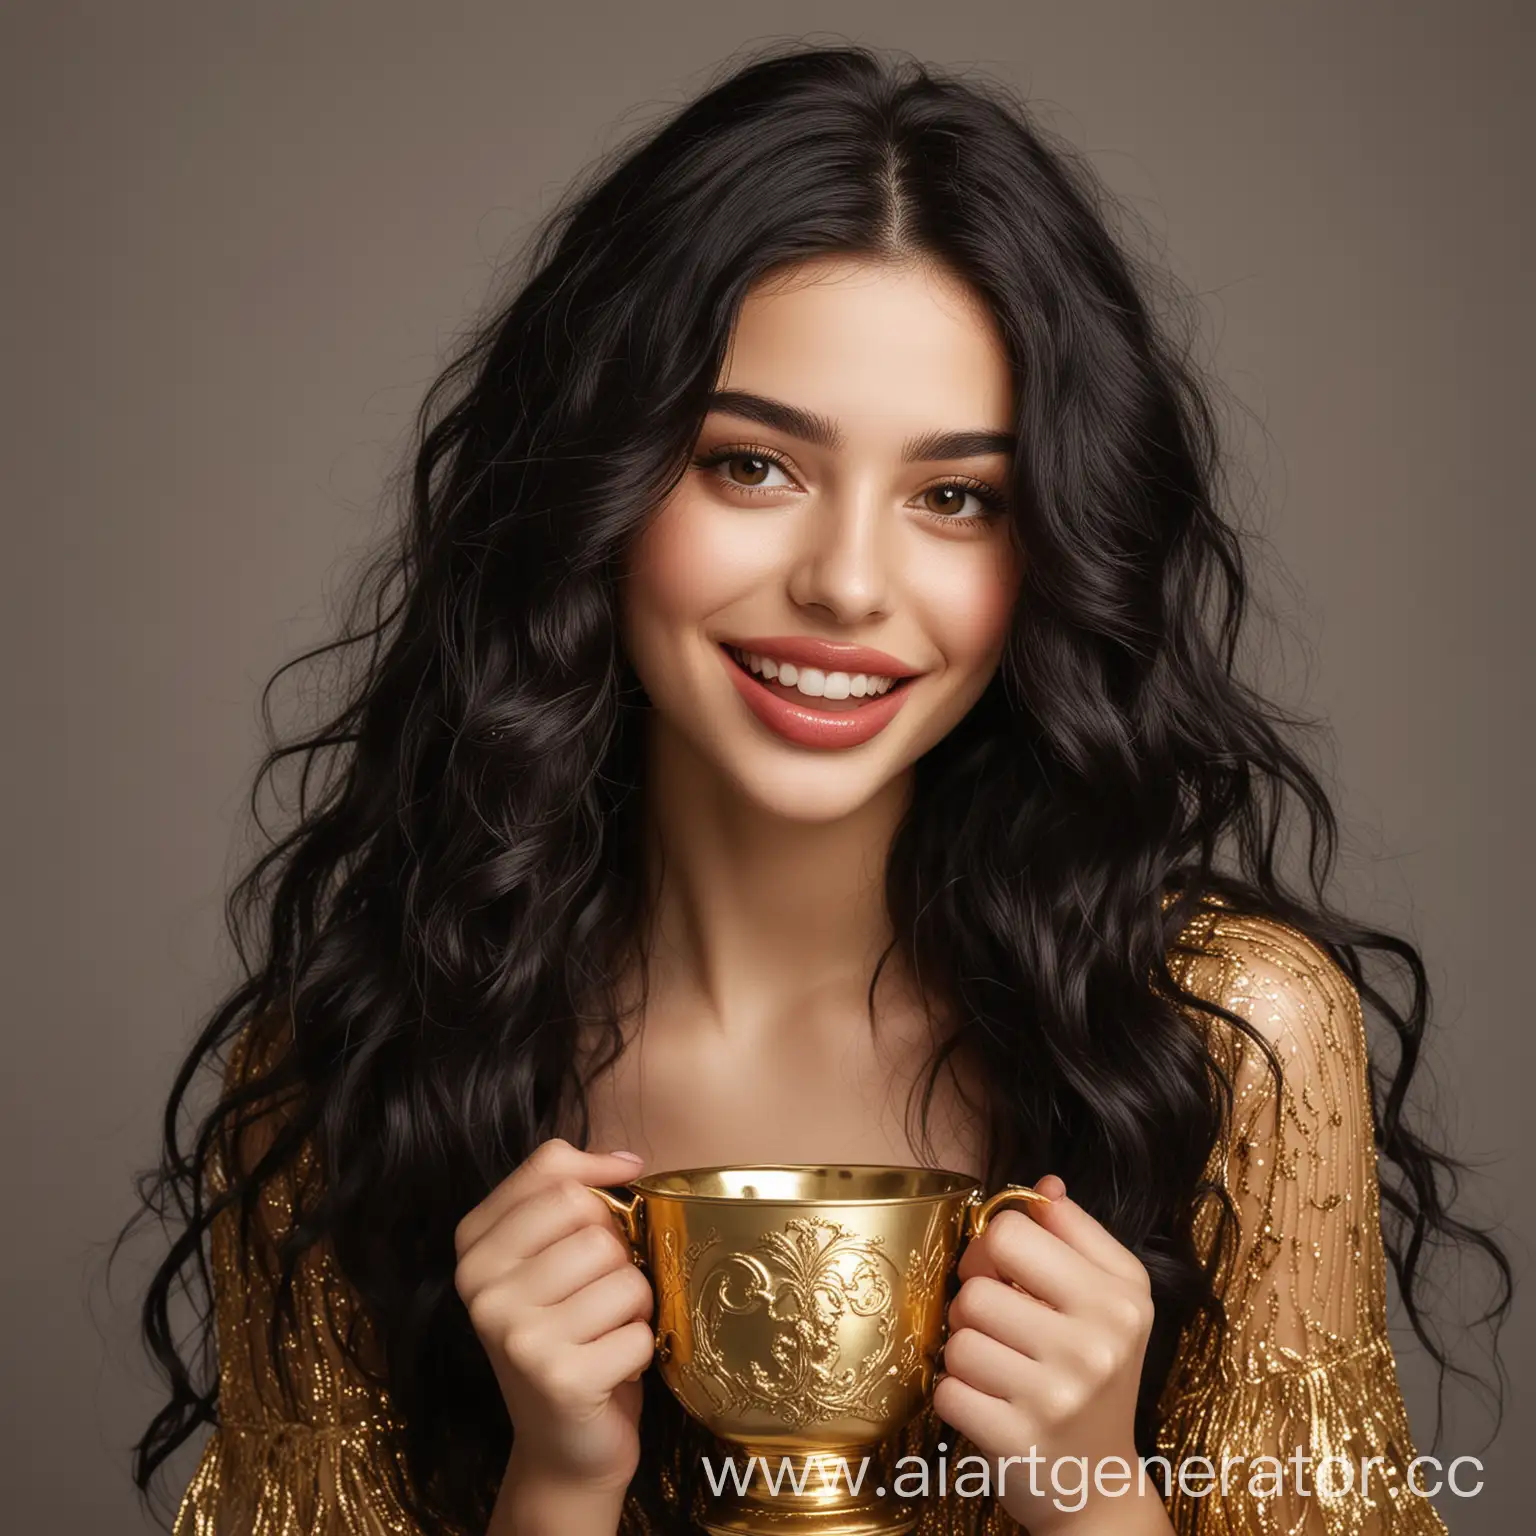 GoldenHaired-Girl-Holding-a-Gilded-Chalice